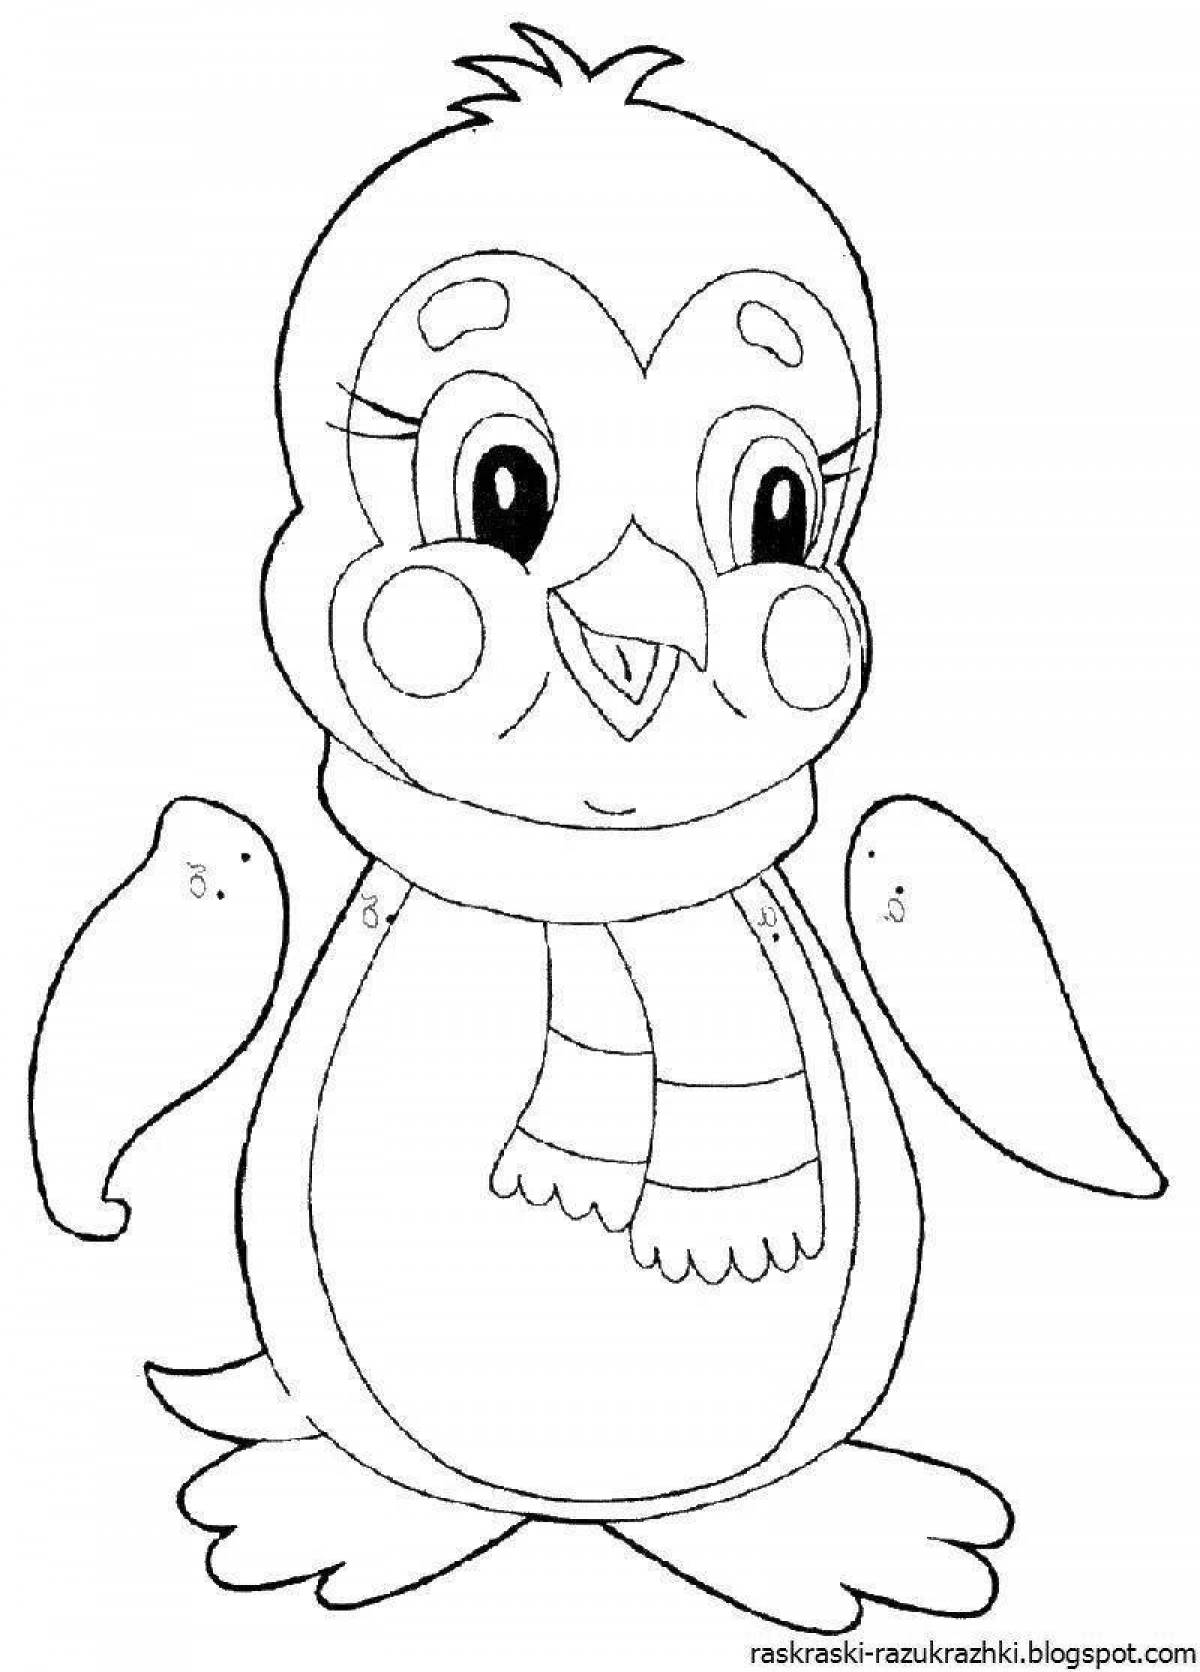 Coloring book smiling penguin